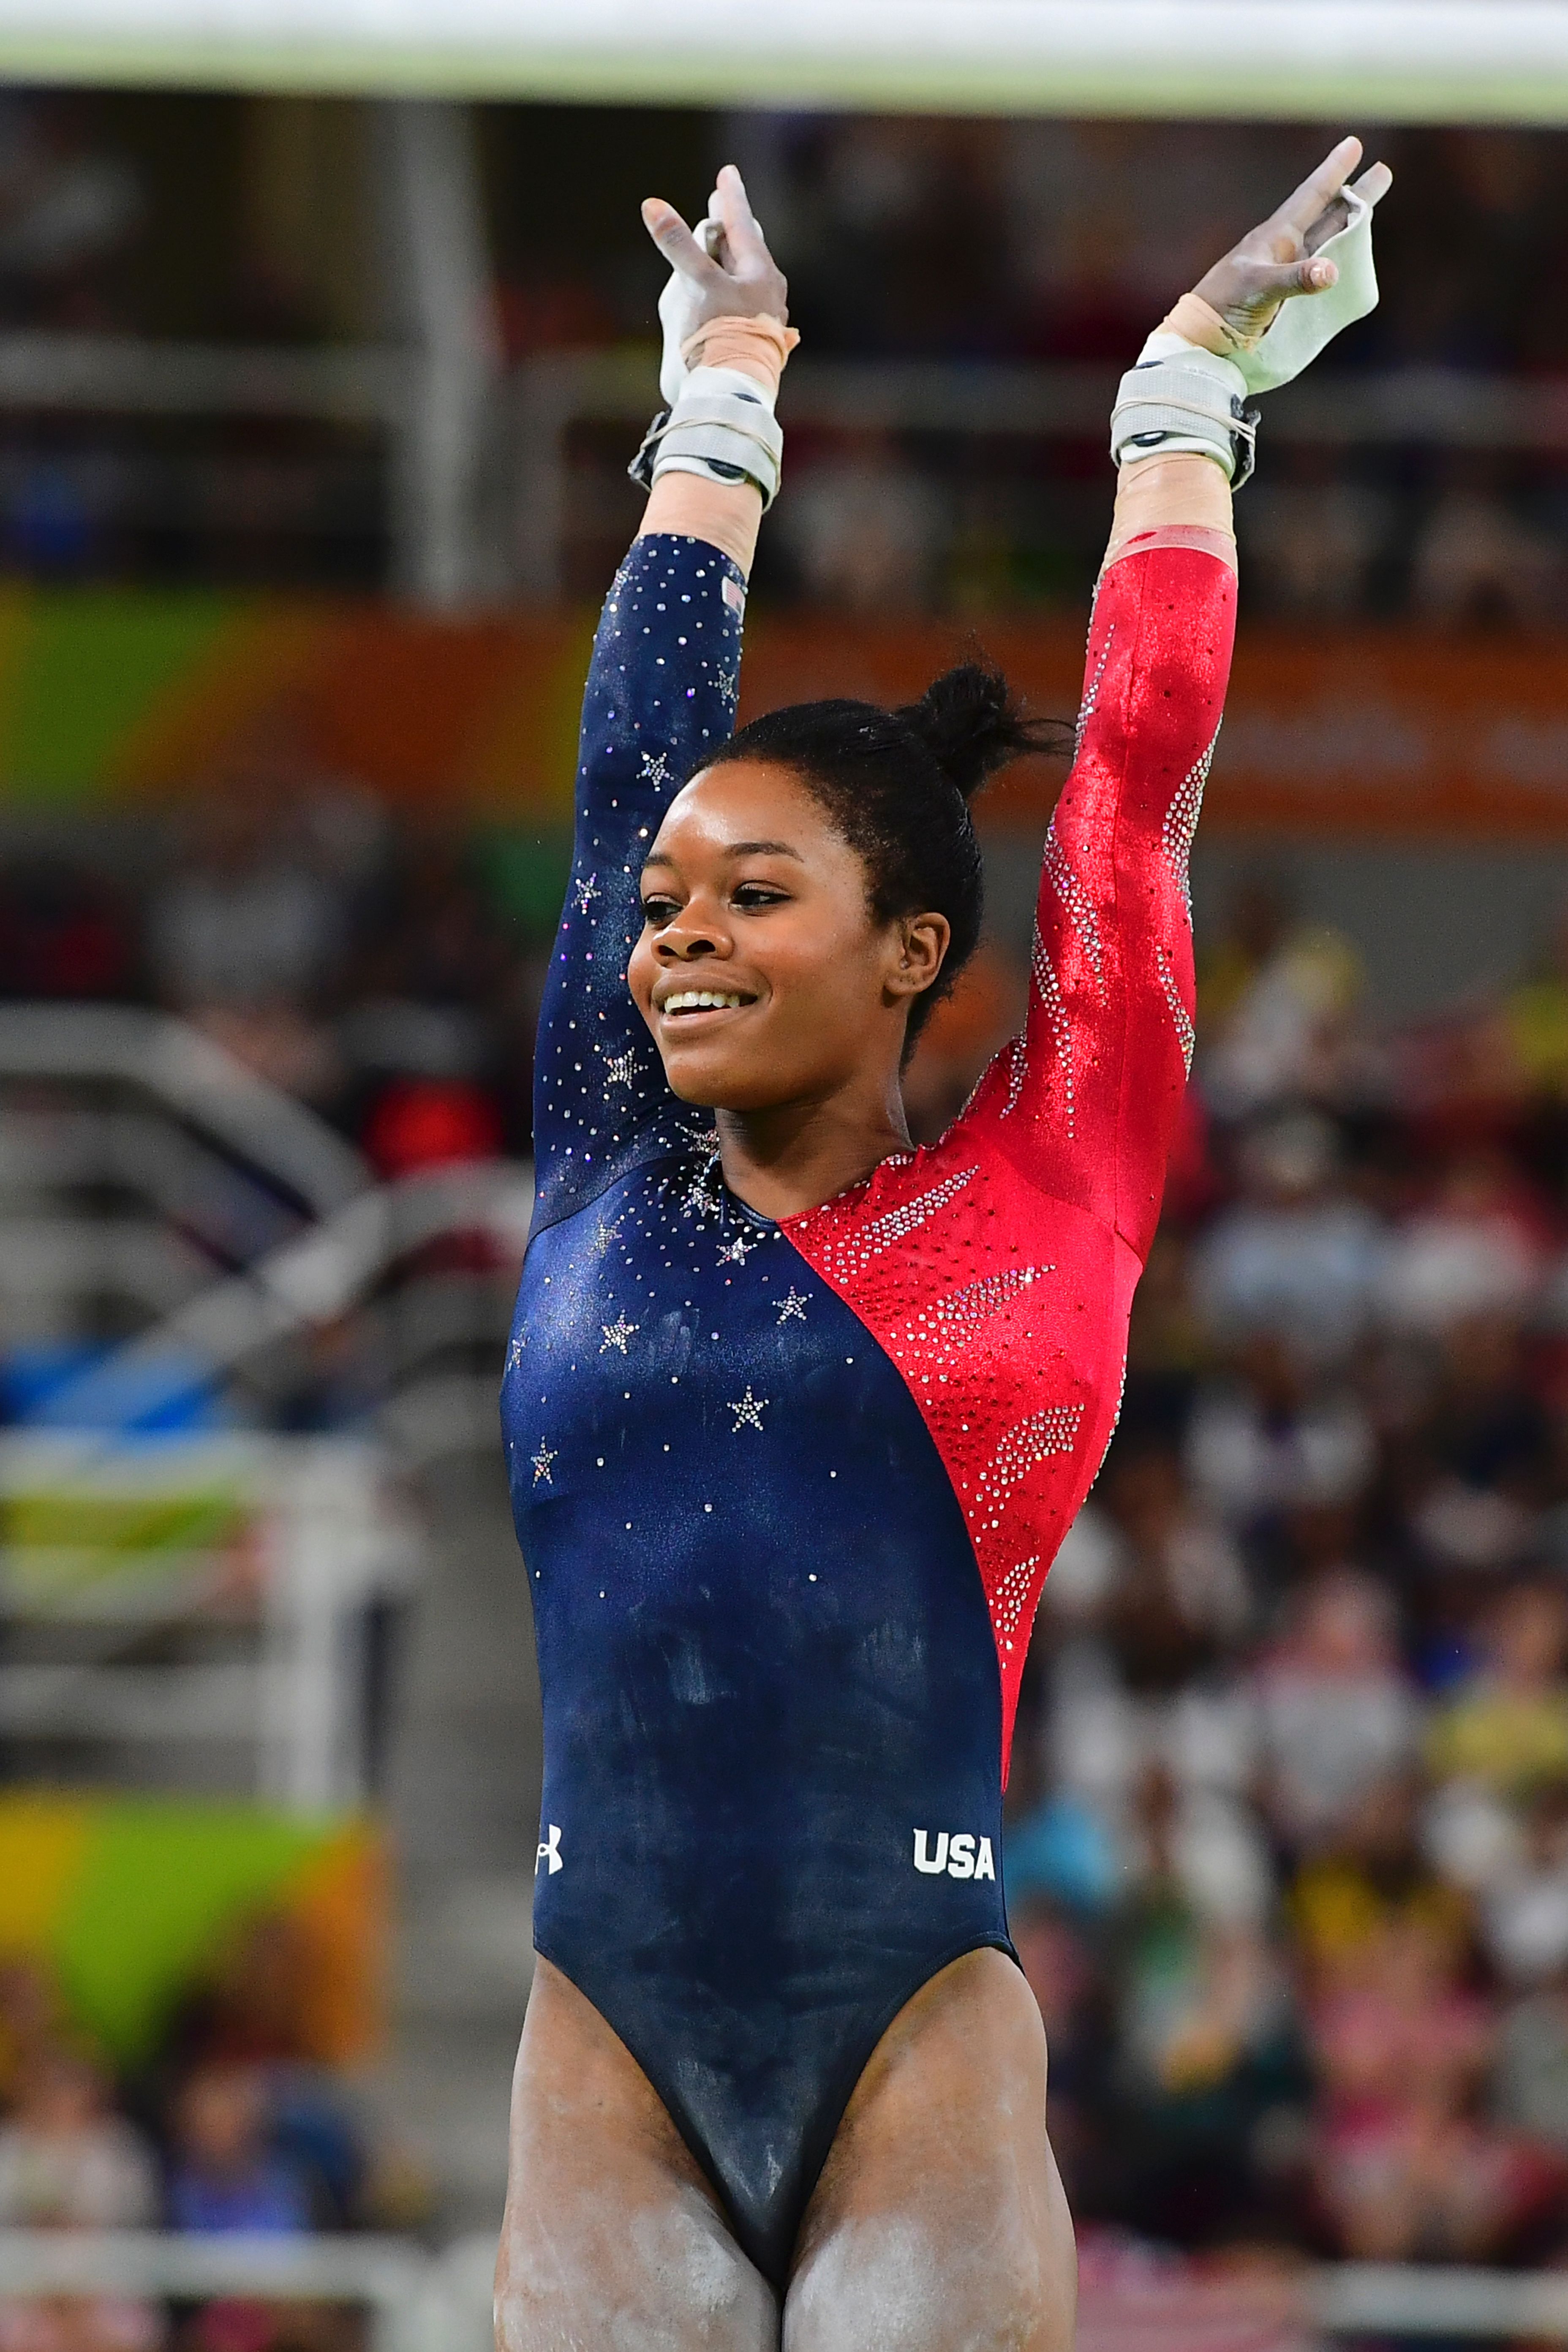 Gabrielle Douglas competes in the qualifying for the women's Uneven Bars event of the Artistic Gymnastics at the Olympic Arena during the Rio 2016 Olympic Games in Rio de Janeiro on August 7, 2016. | Source: Getty Images